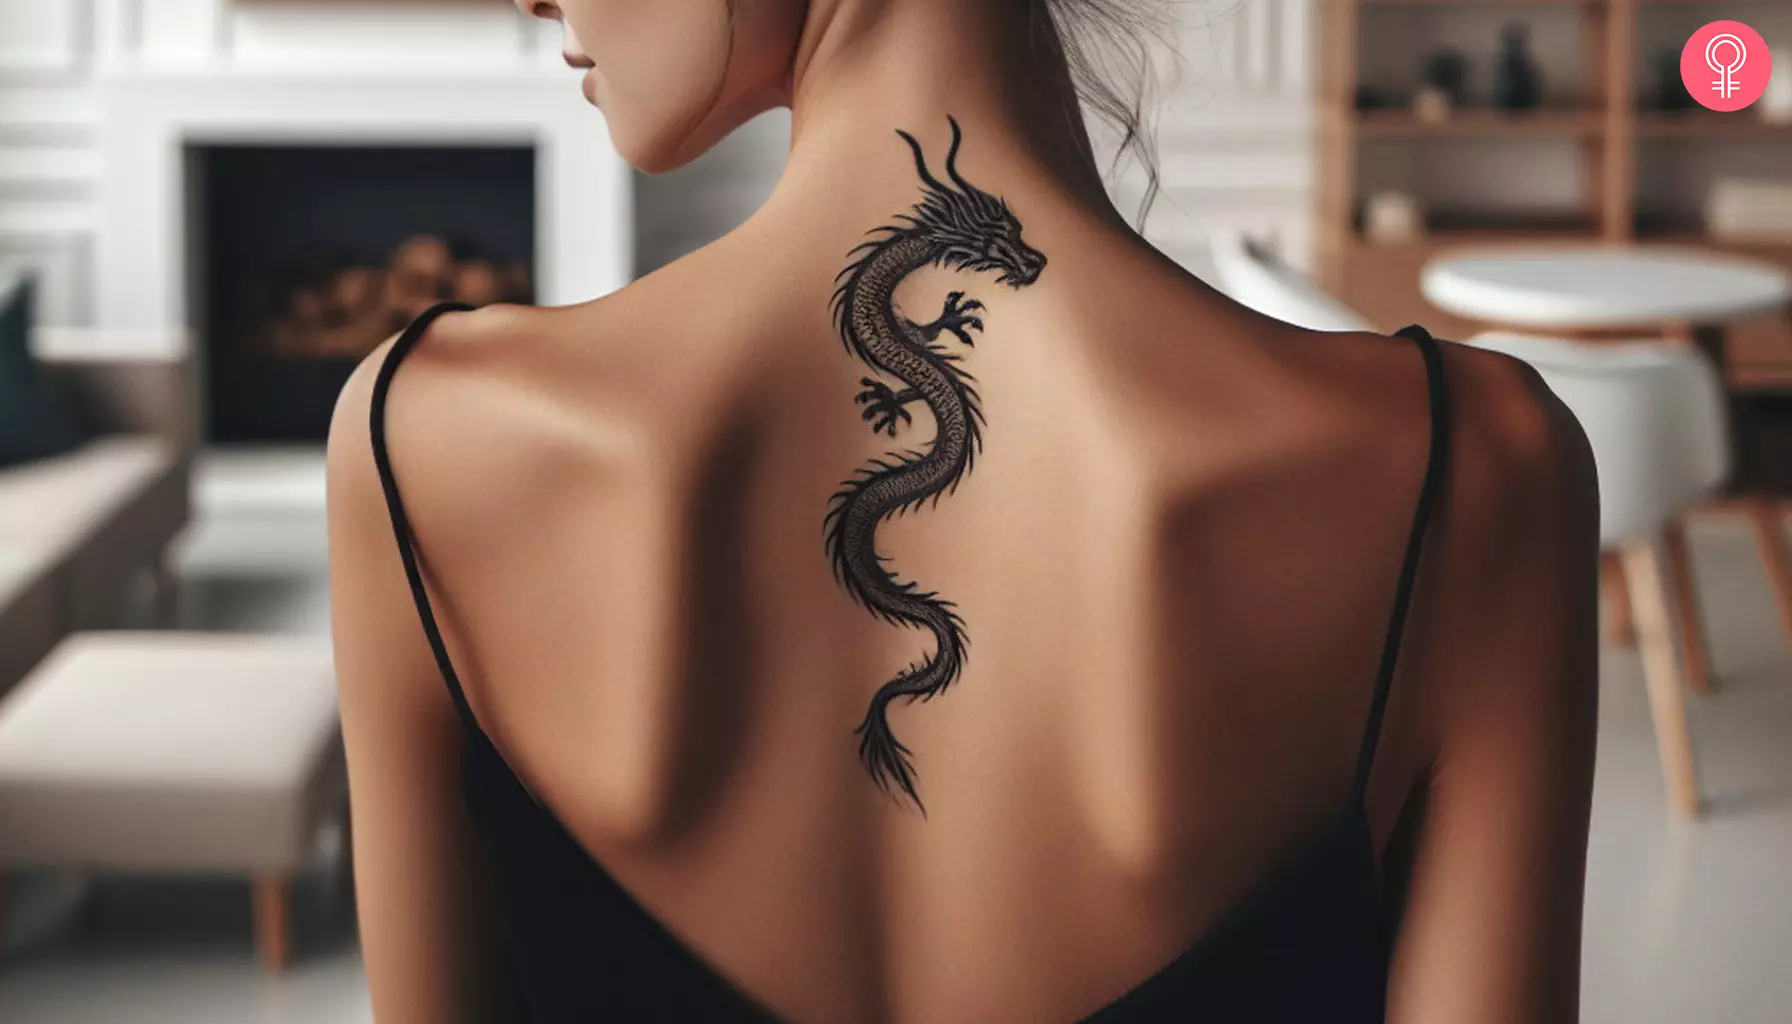 A simple black ink dragon serpent tattoo on the spine of a woman